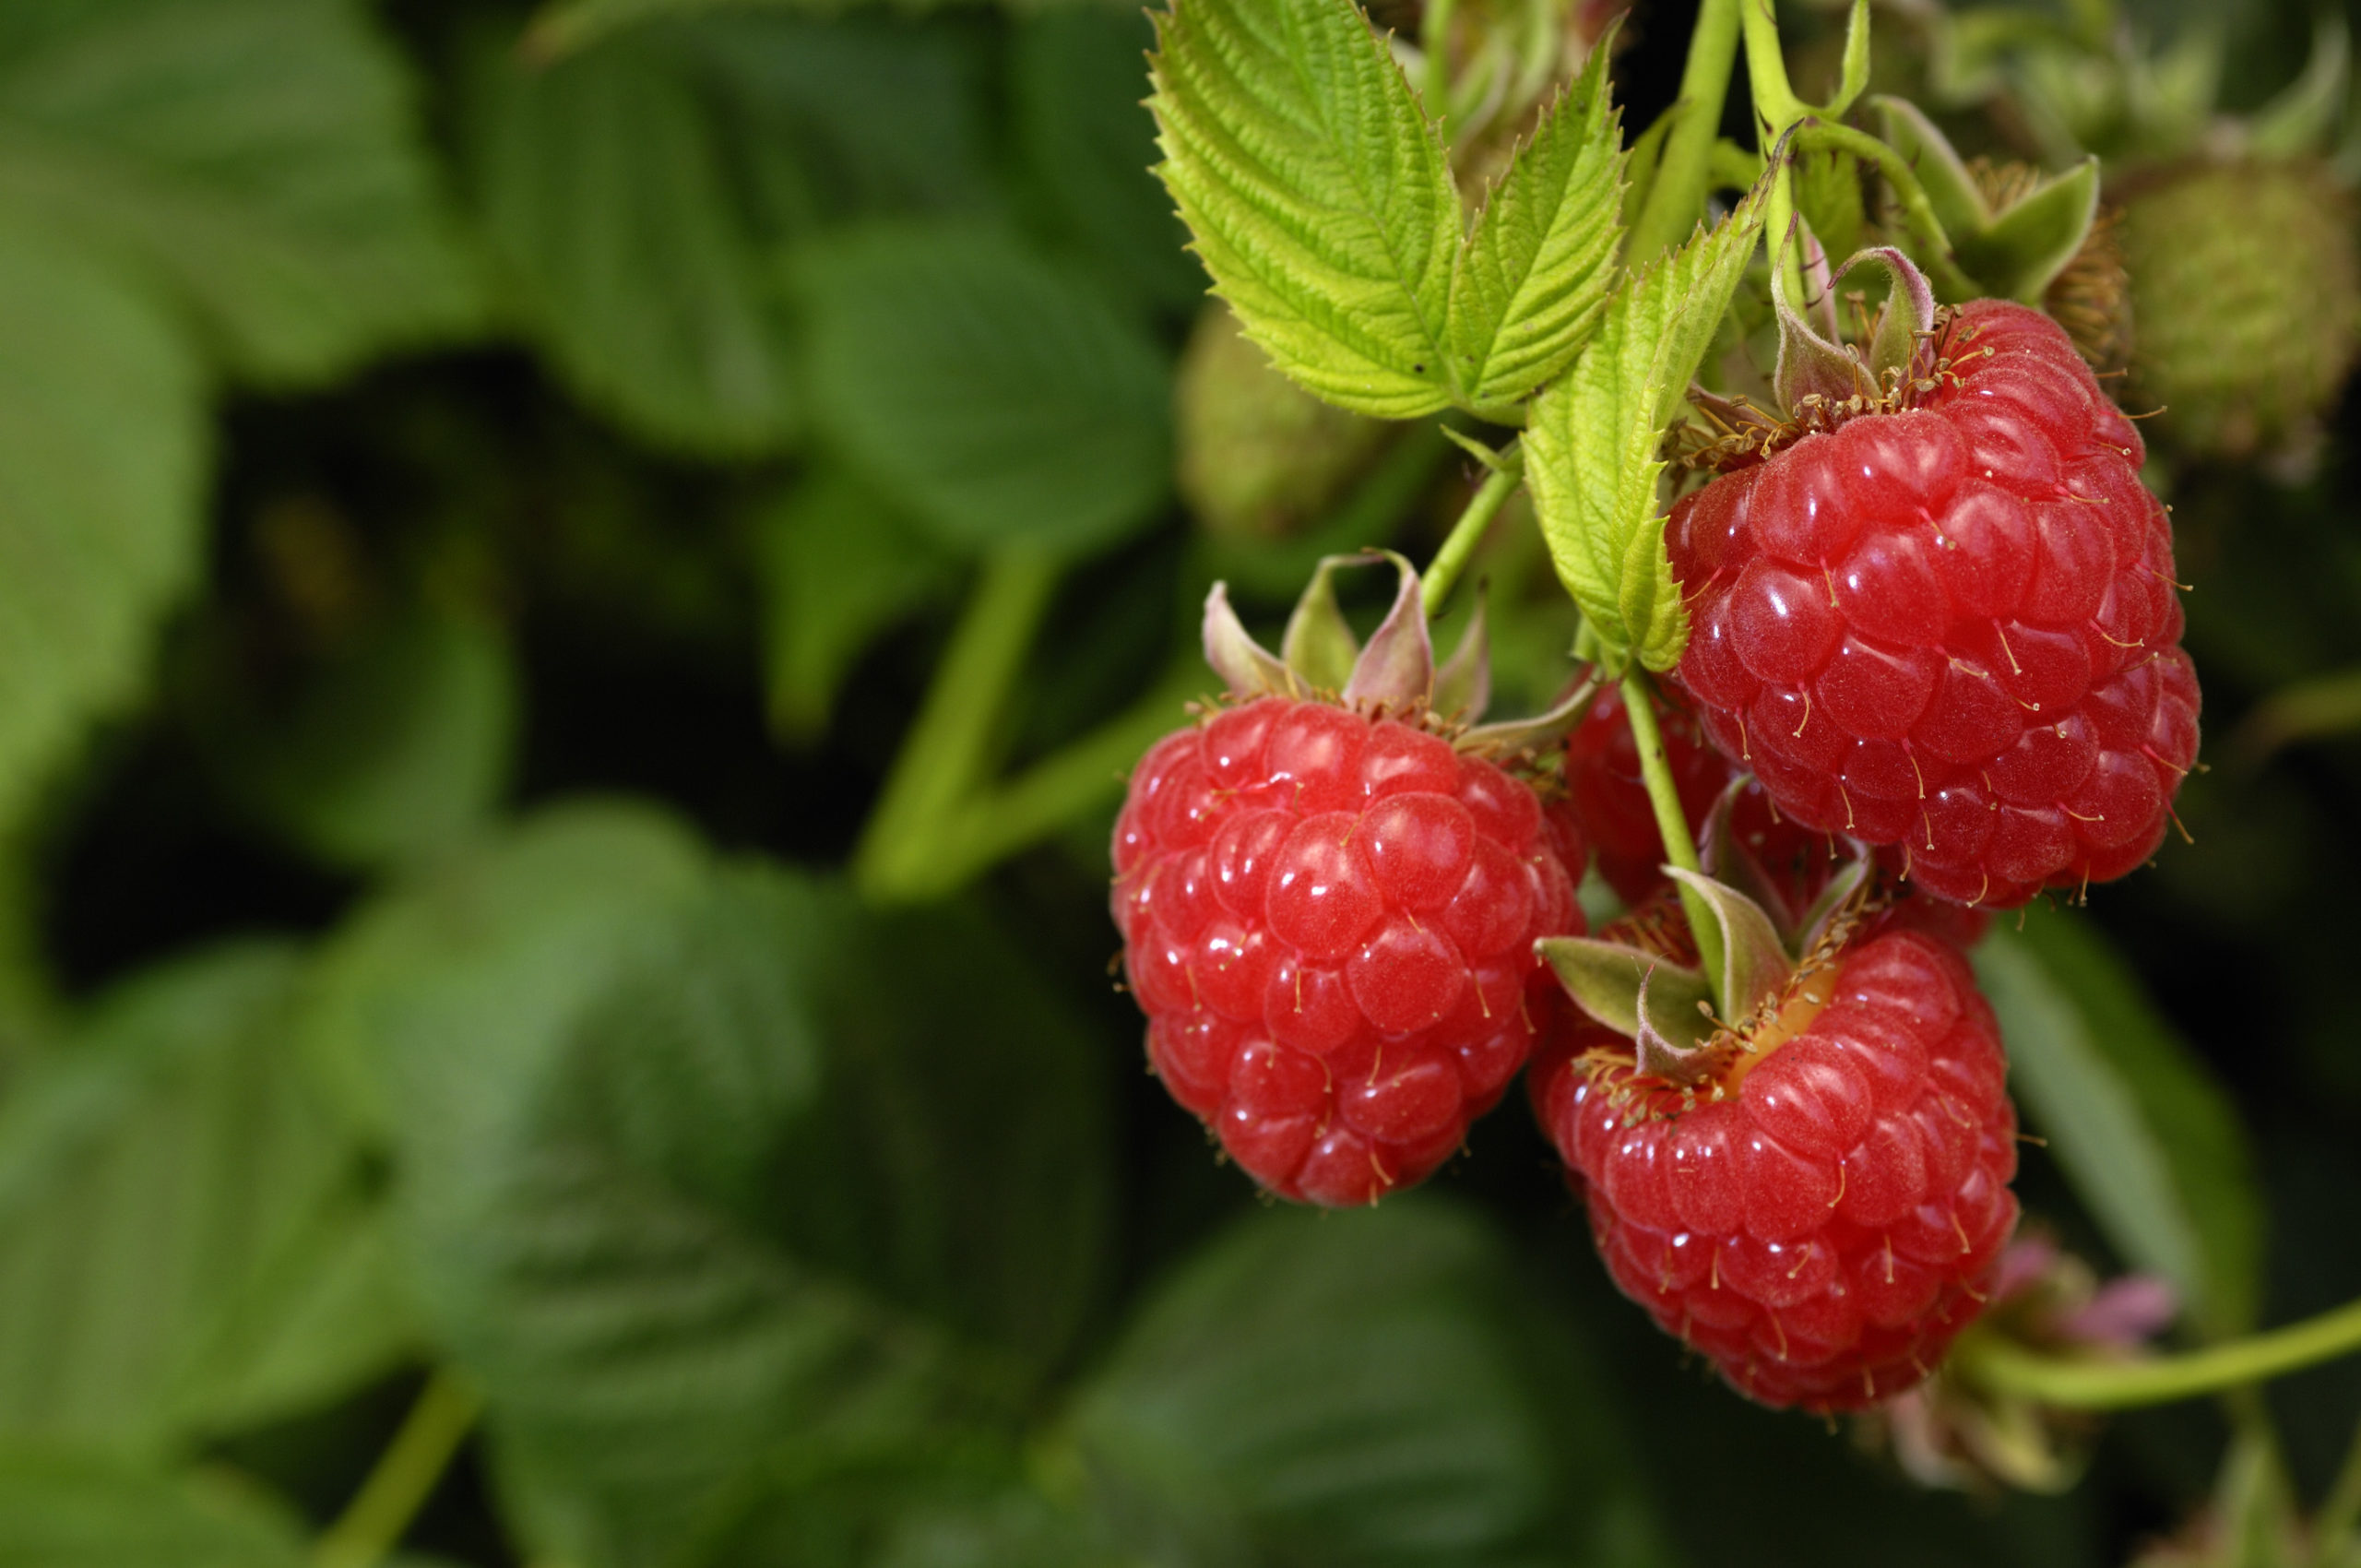 Close-up of Ripening Raspberries on the vine